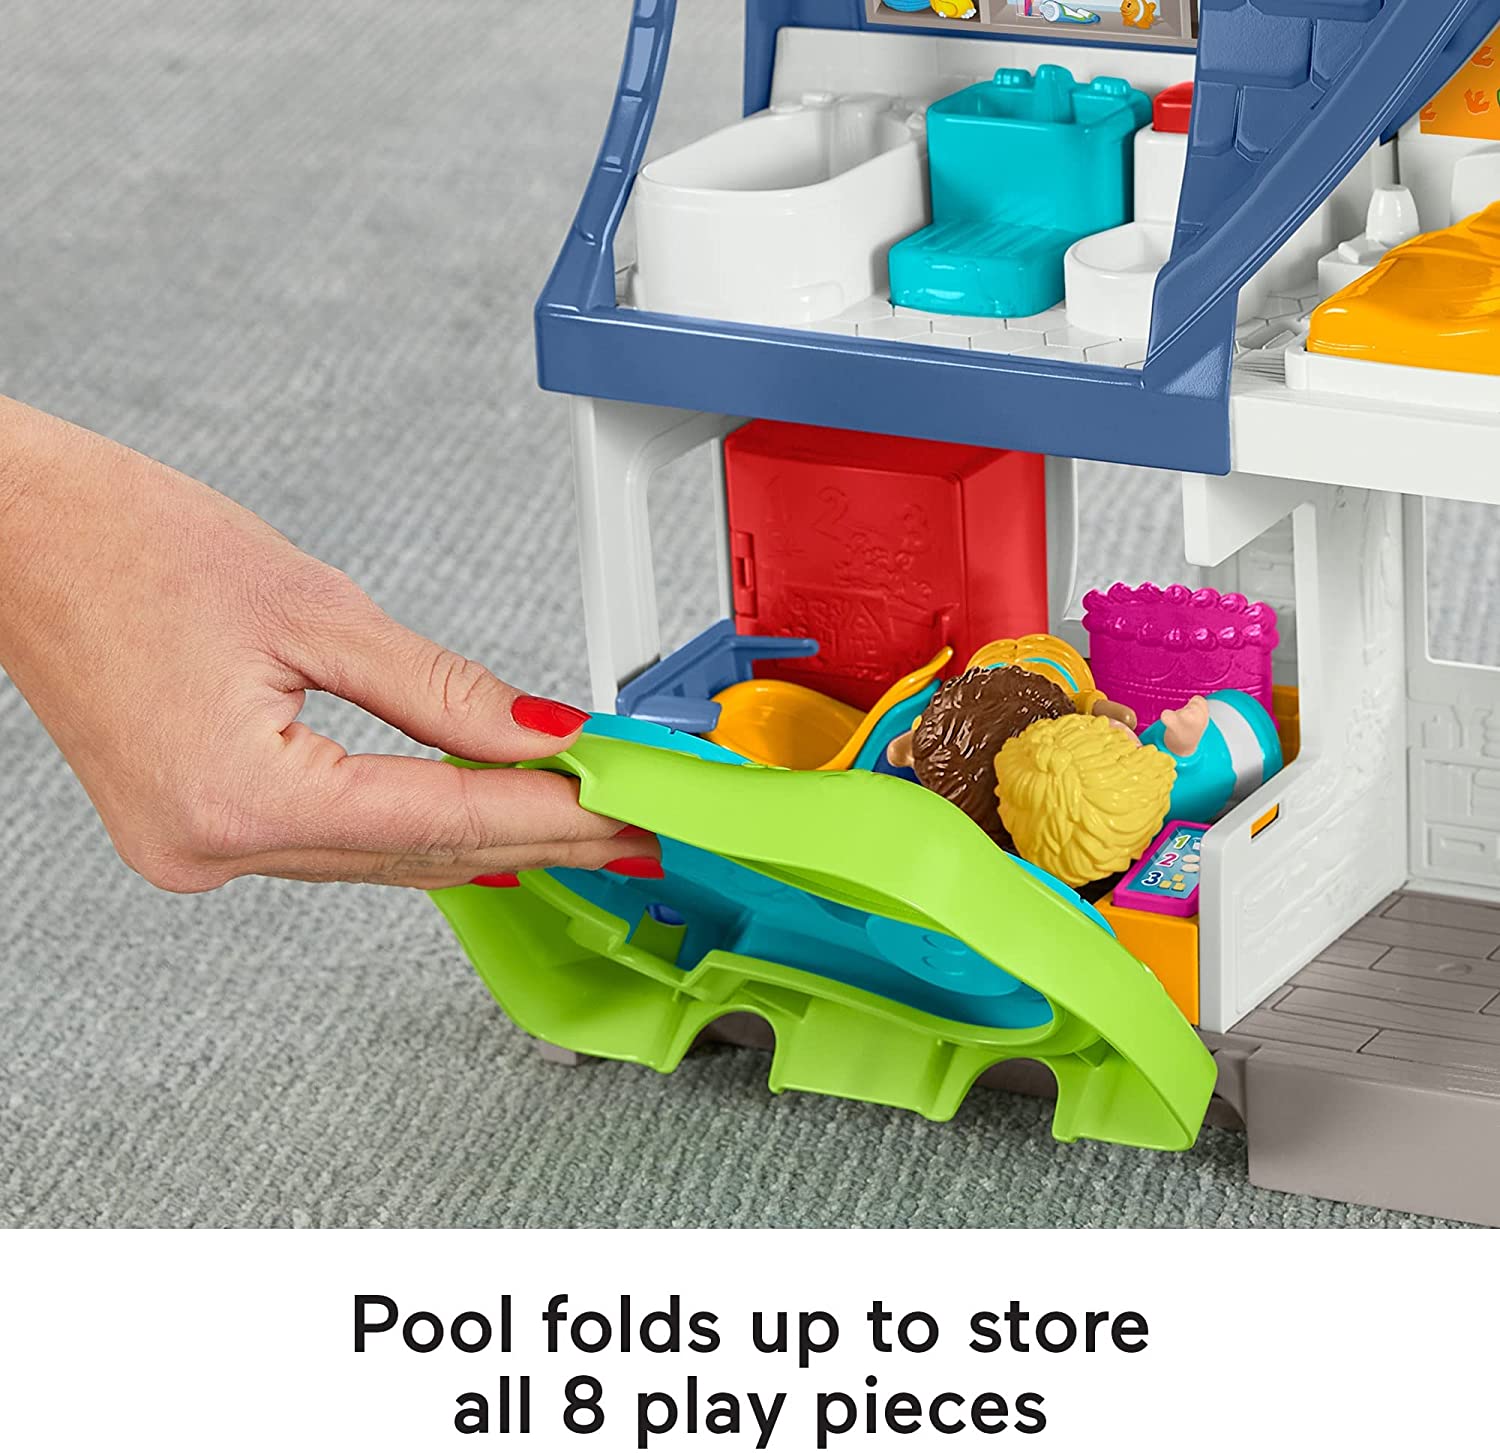 Fisher Price Little People Play Home